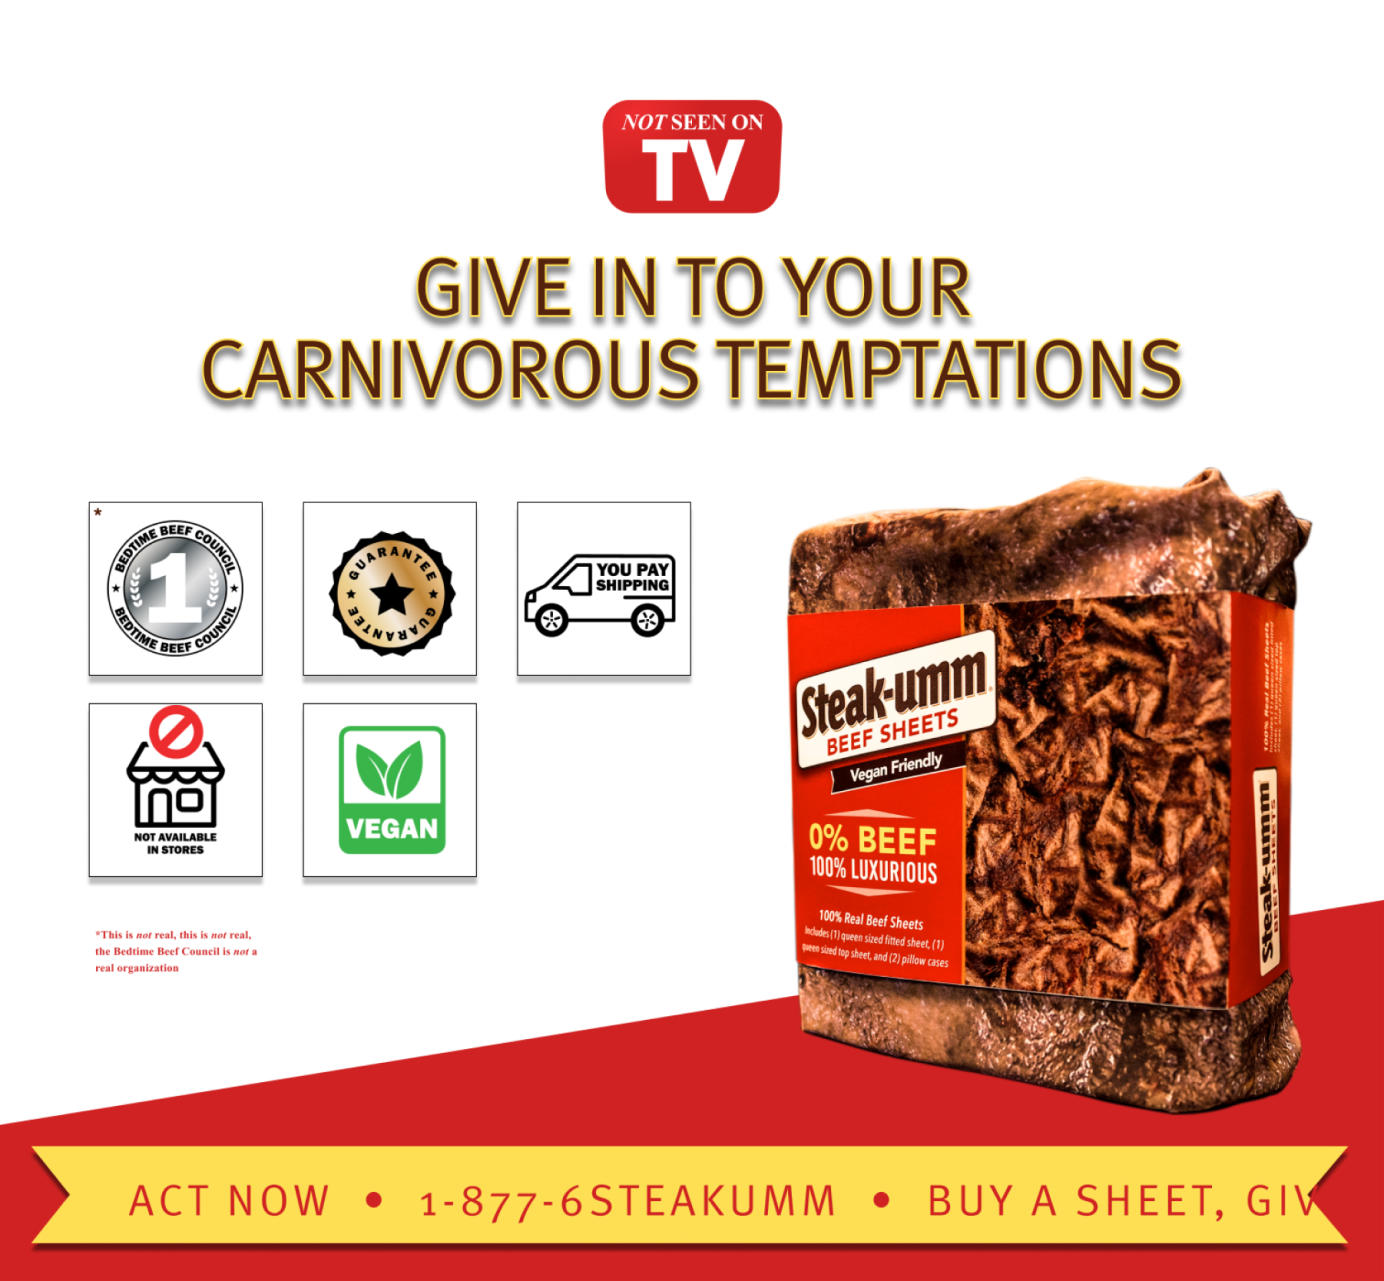 Screenshot of the 'Give in to Your Carnivorous Temptations' section of the beefsheets.com website.